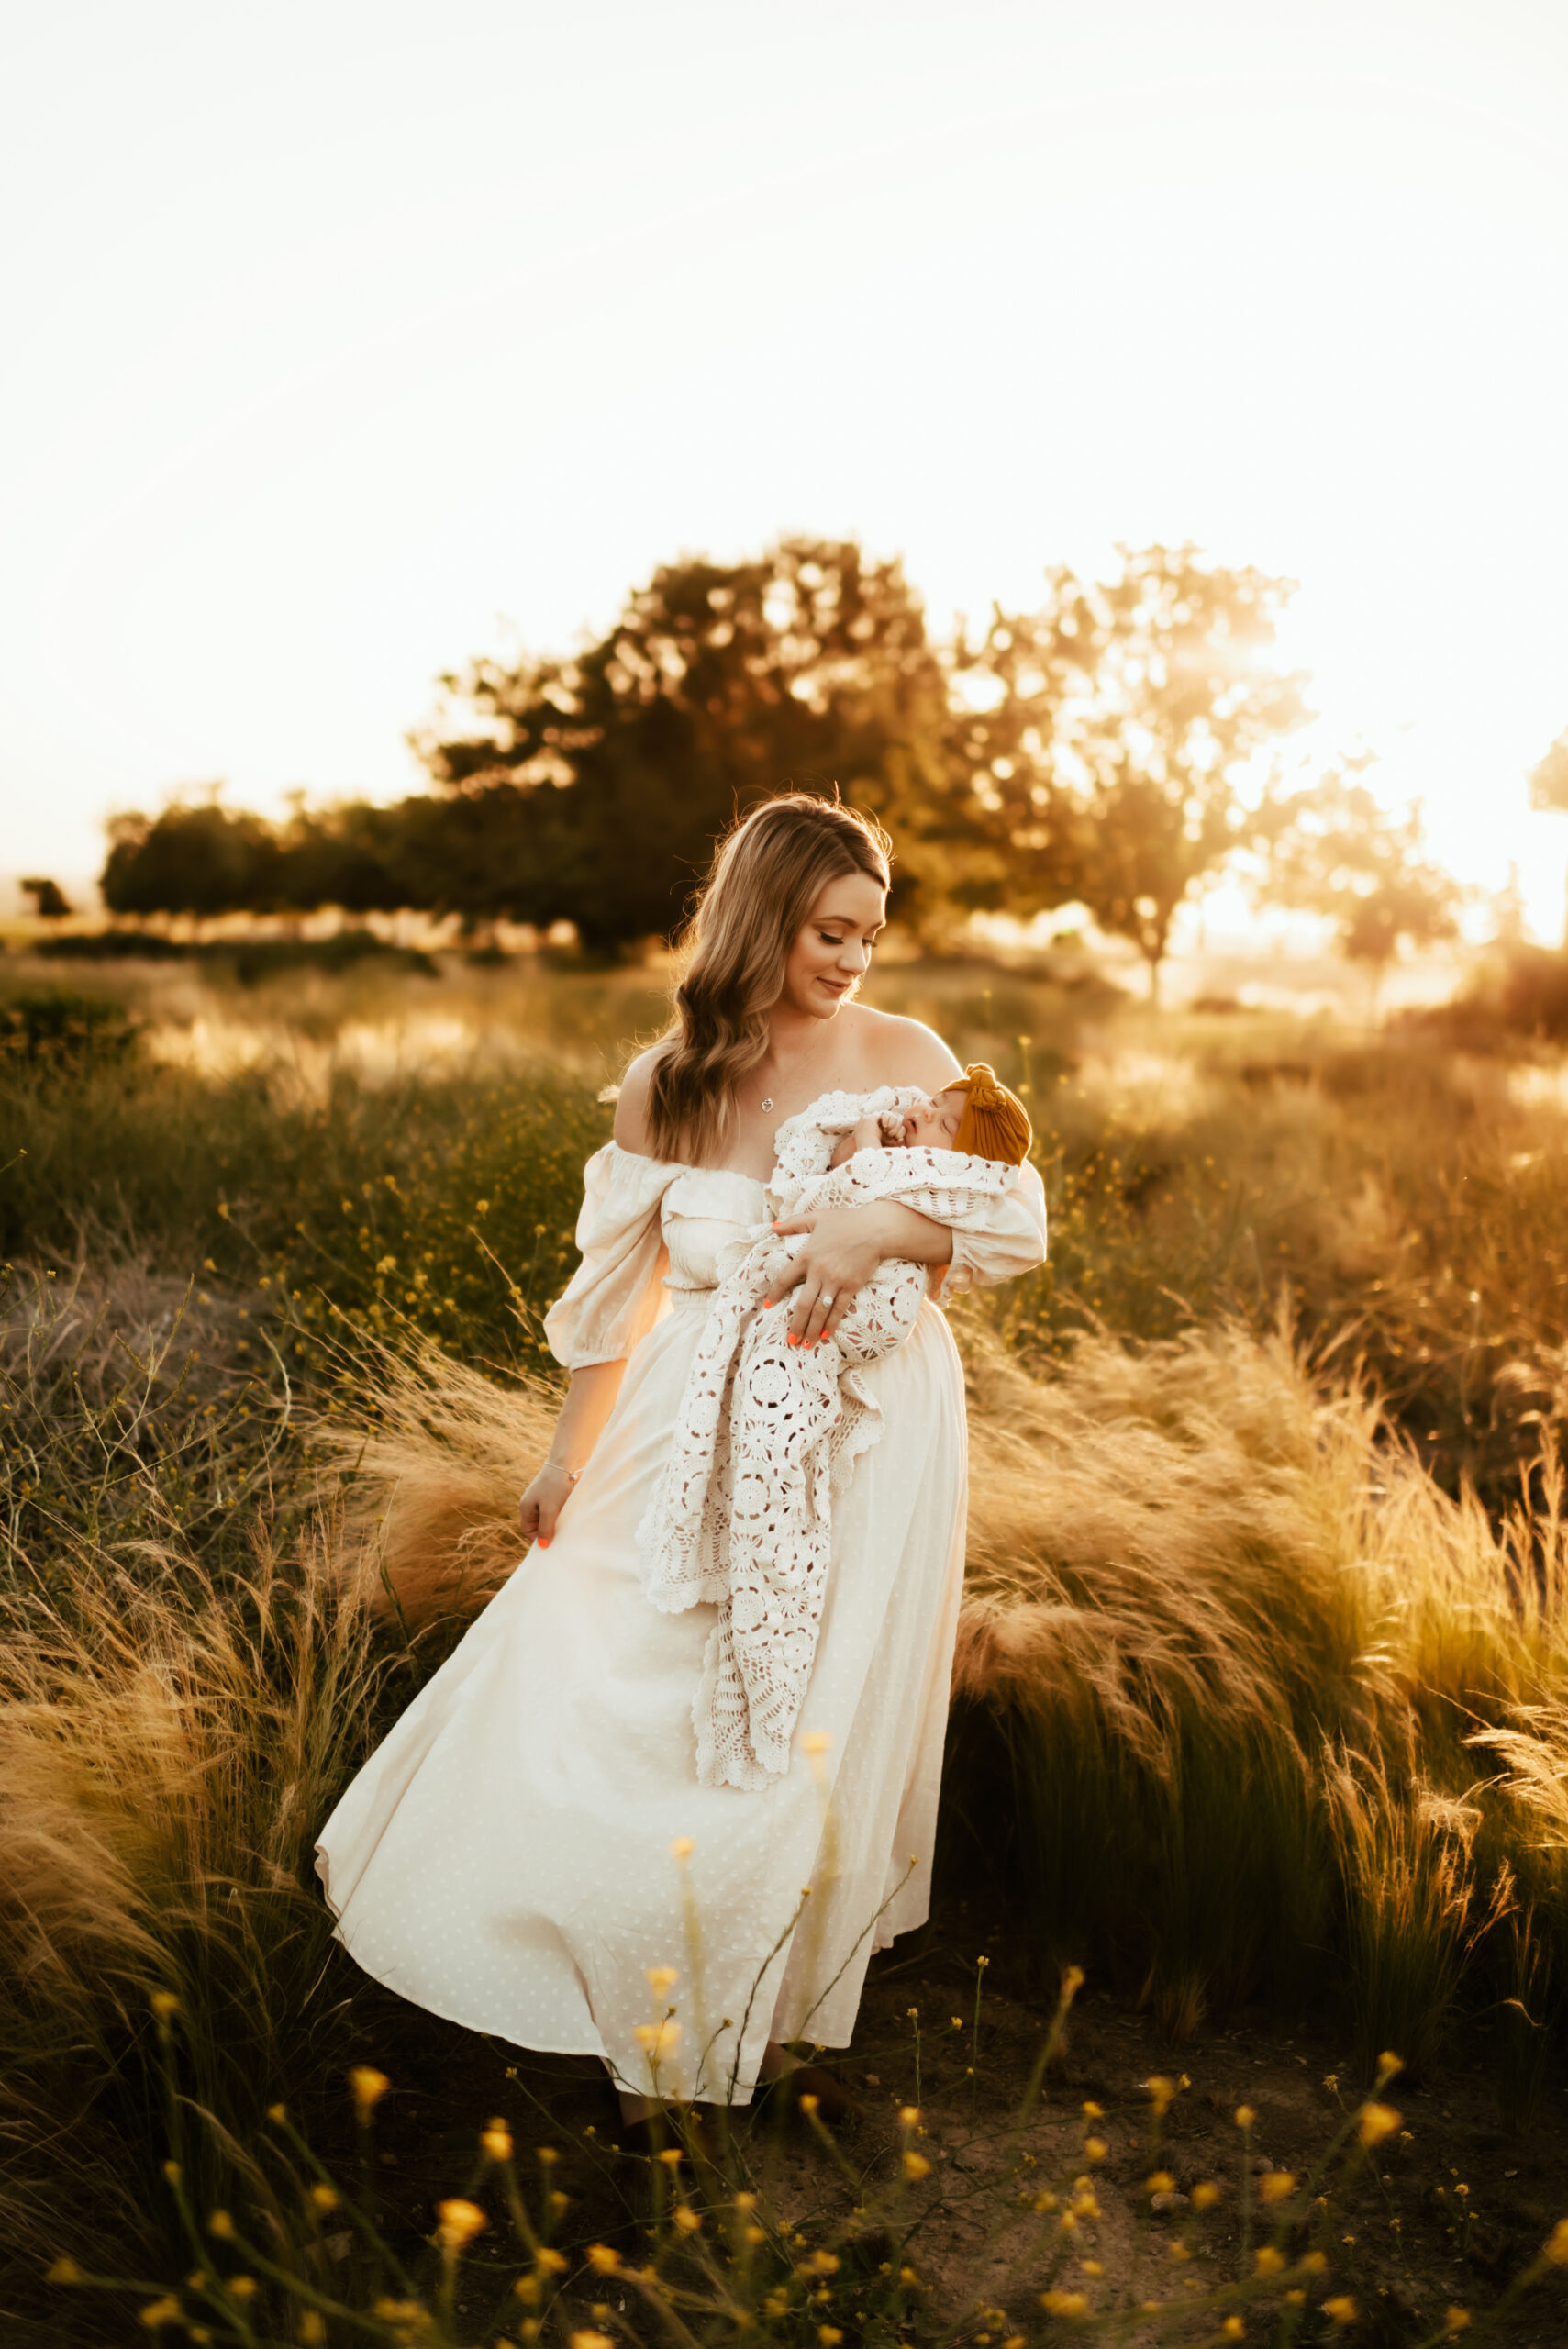 Mother looking lovingly at her baby in a field at sunset while swaying her dress